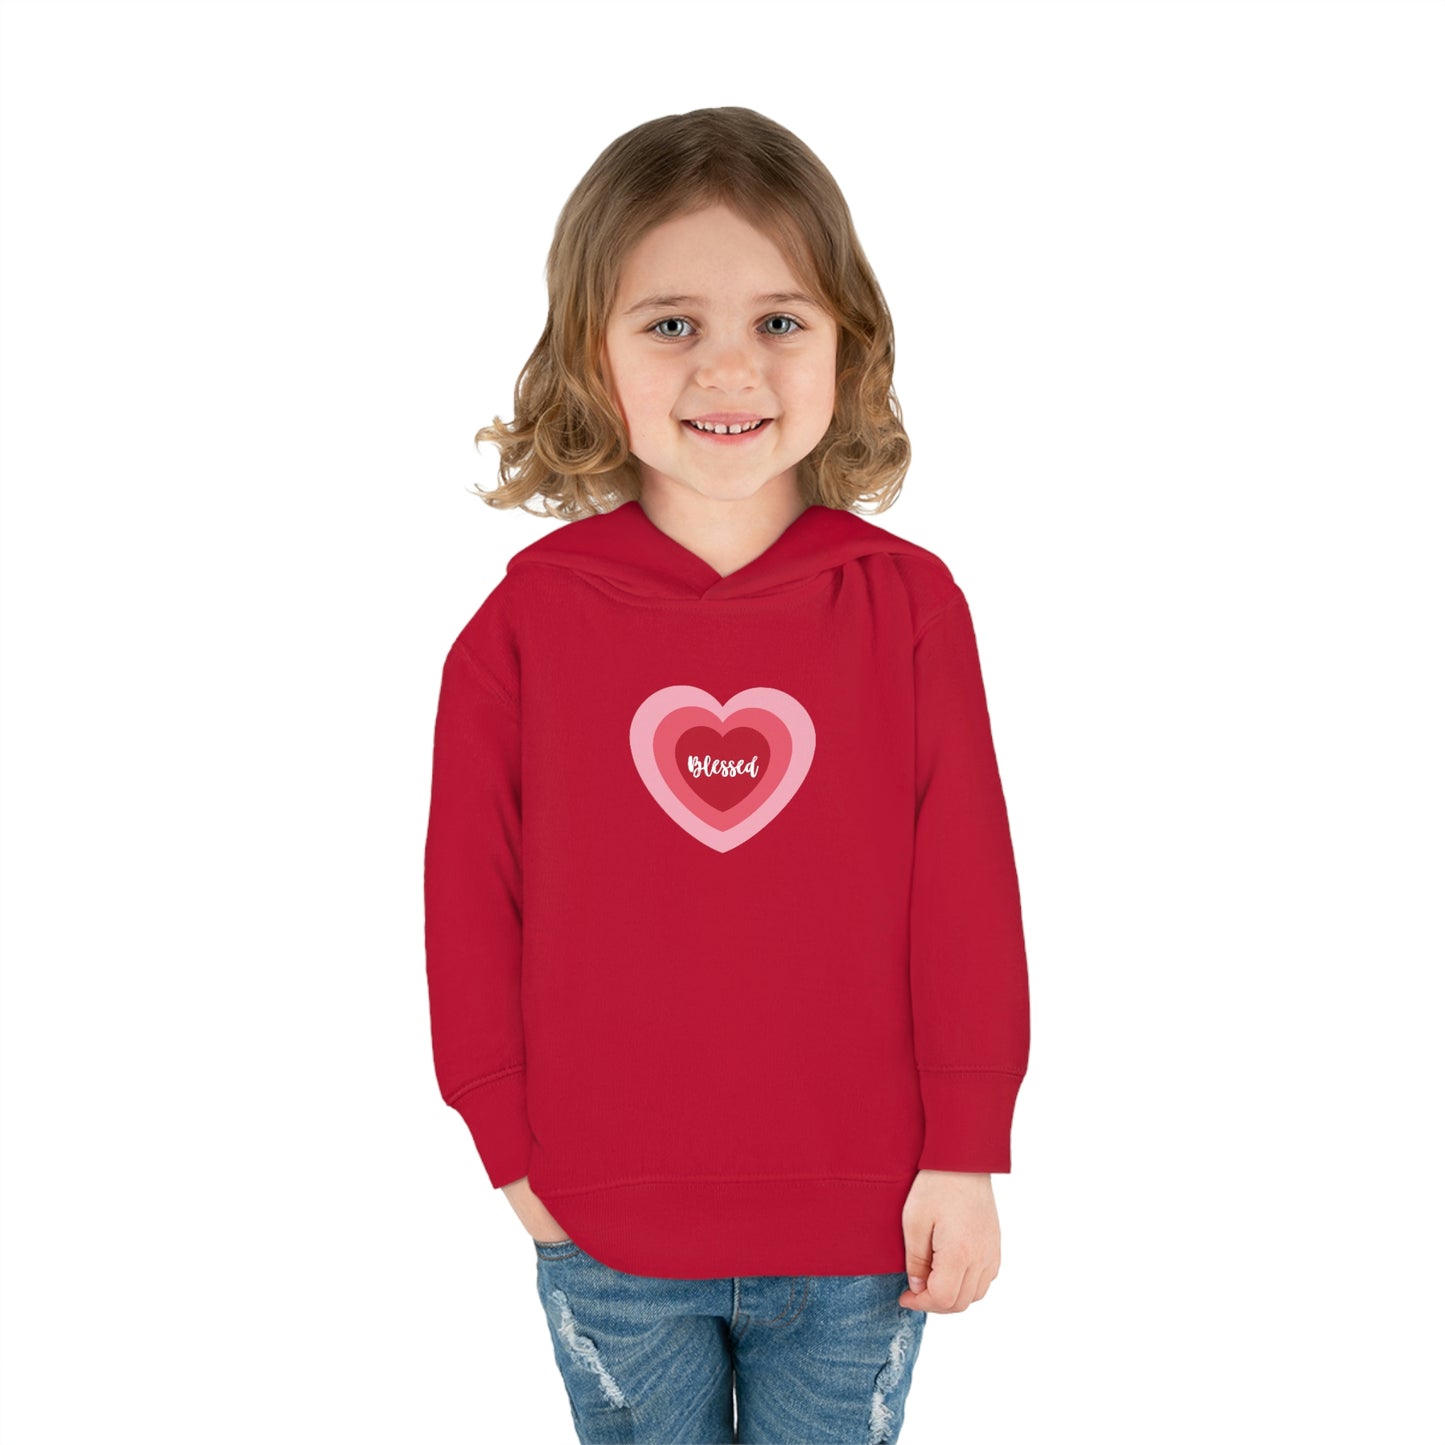 Blessed Heart - Toddler Pullover Fleece Hoodie